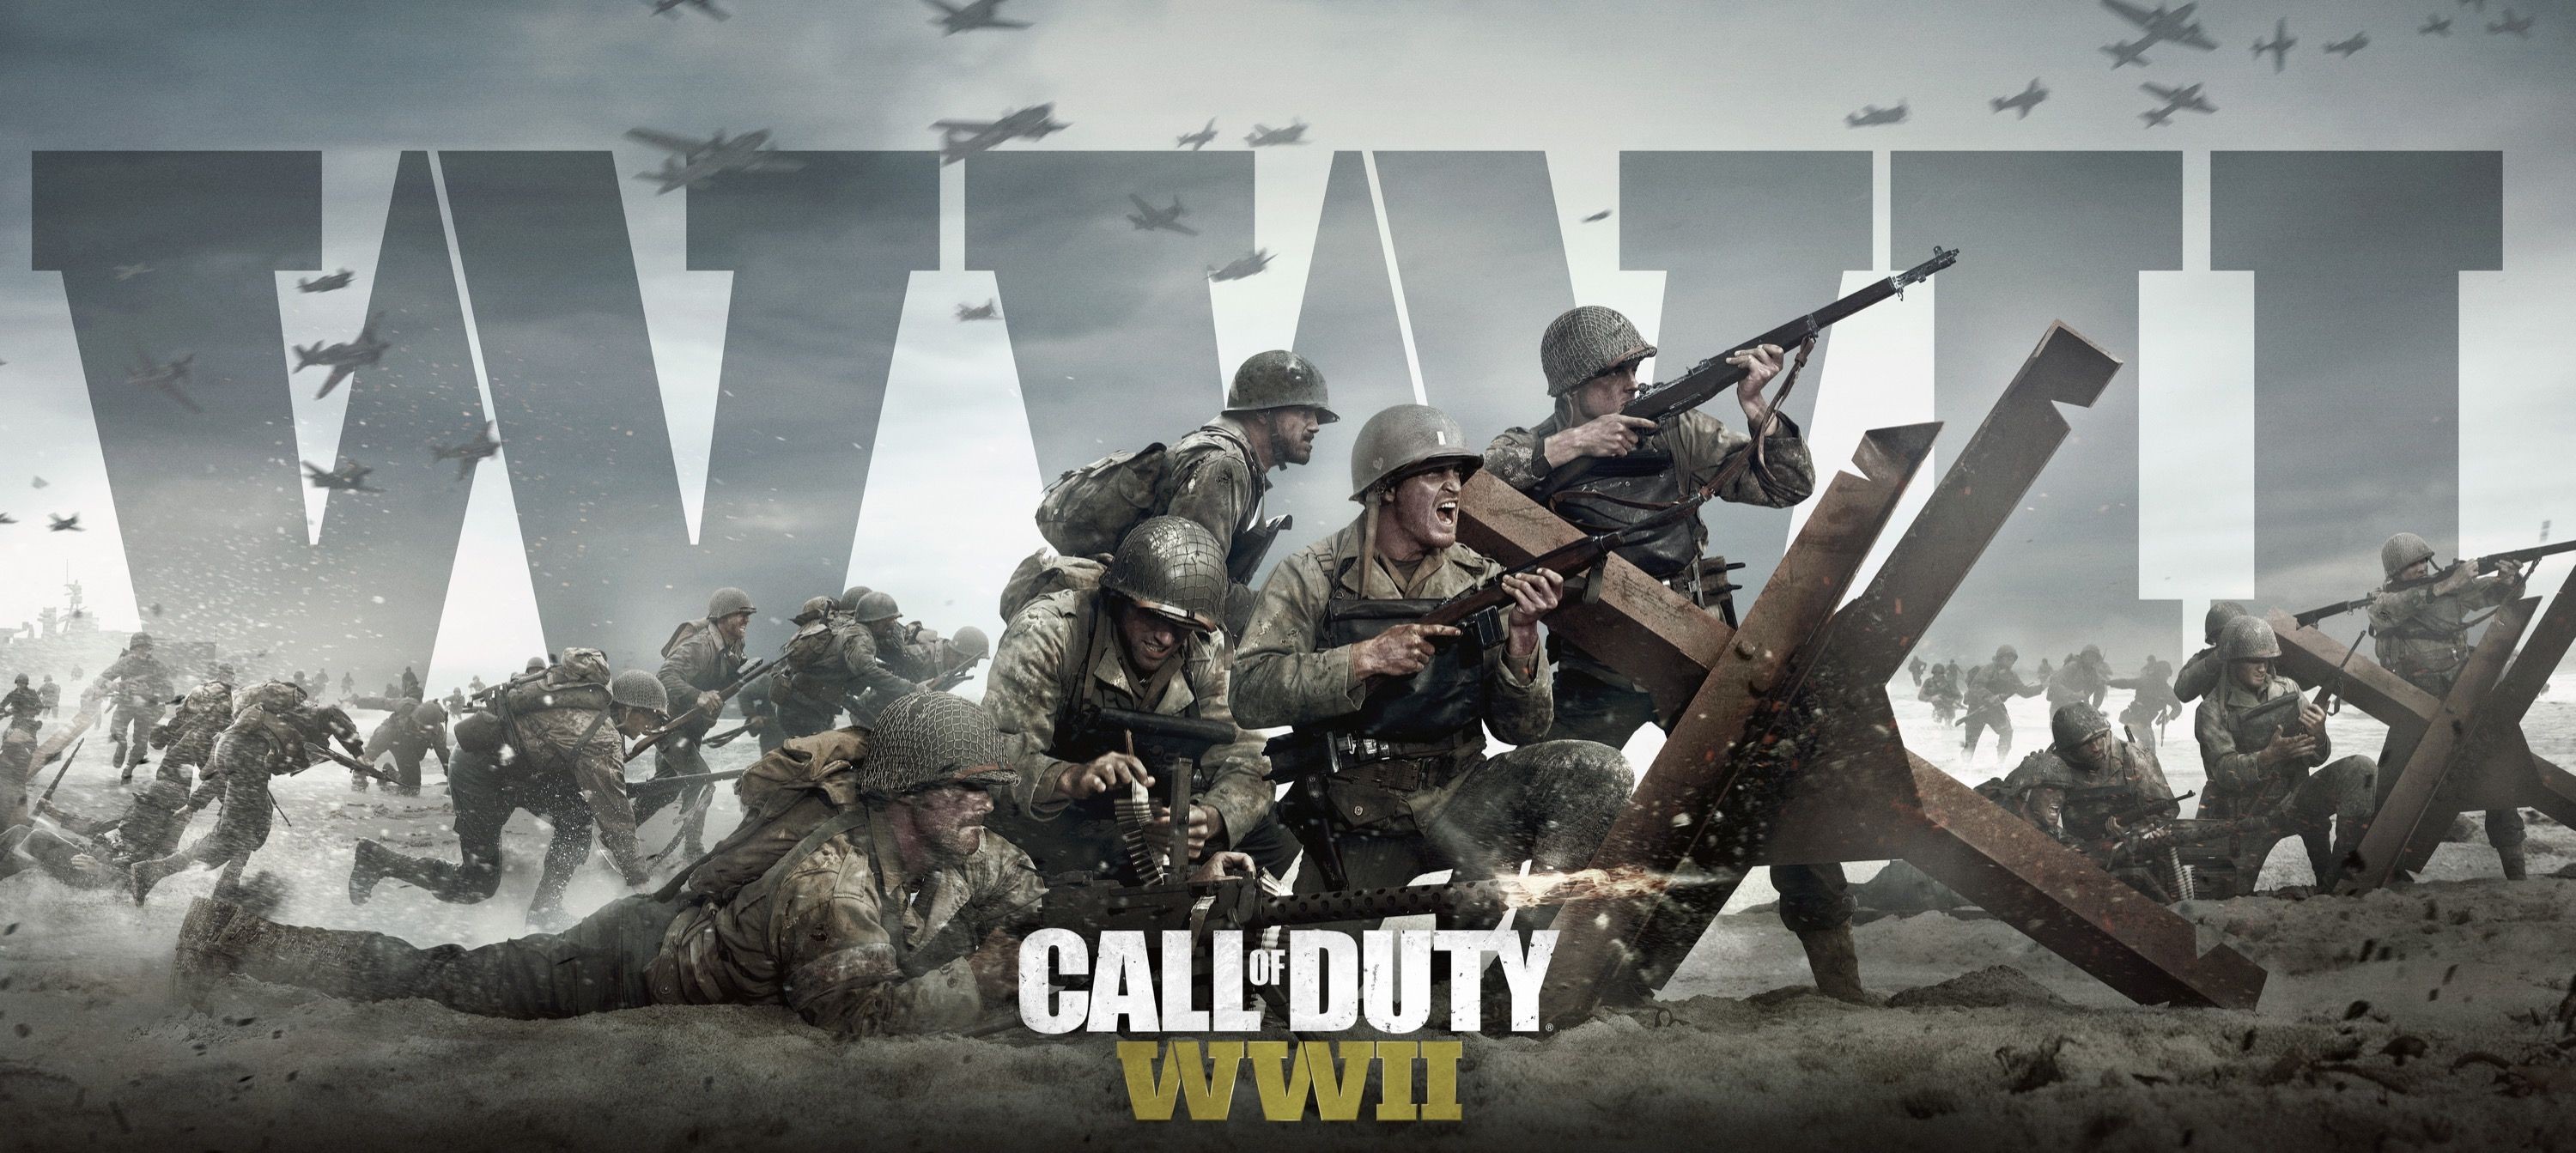 Call Of Duty Wallpaper Awesome Iphone Wallpaper 370z - Call Of Duty Ww2 , HD Wallpaper & Backgrounds